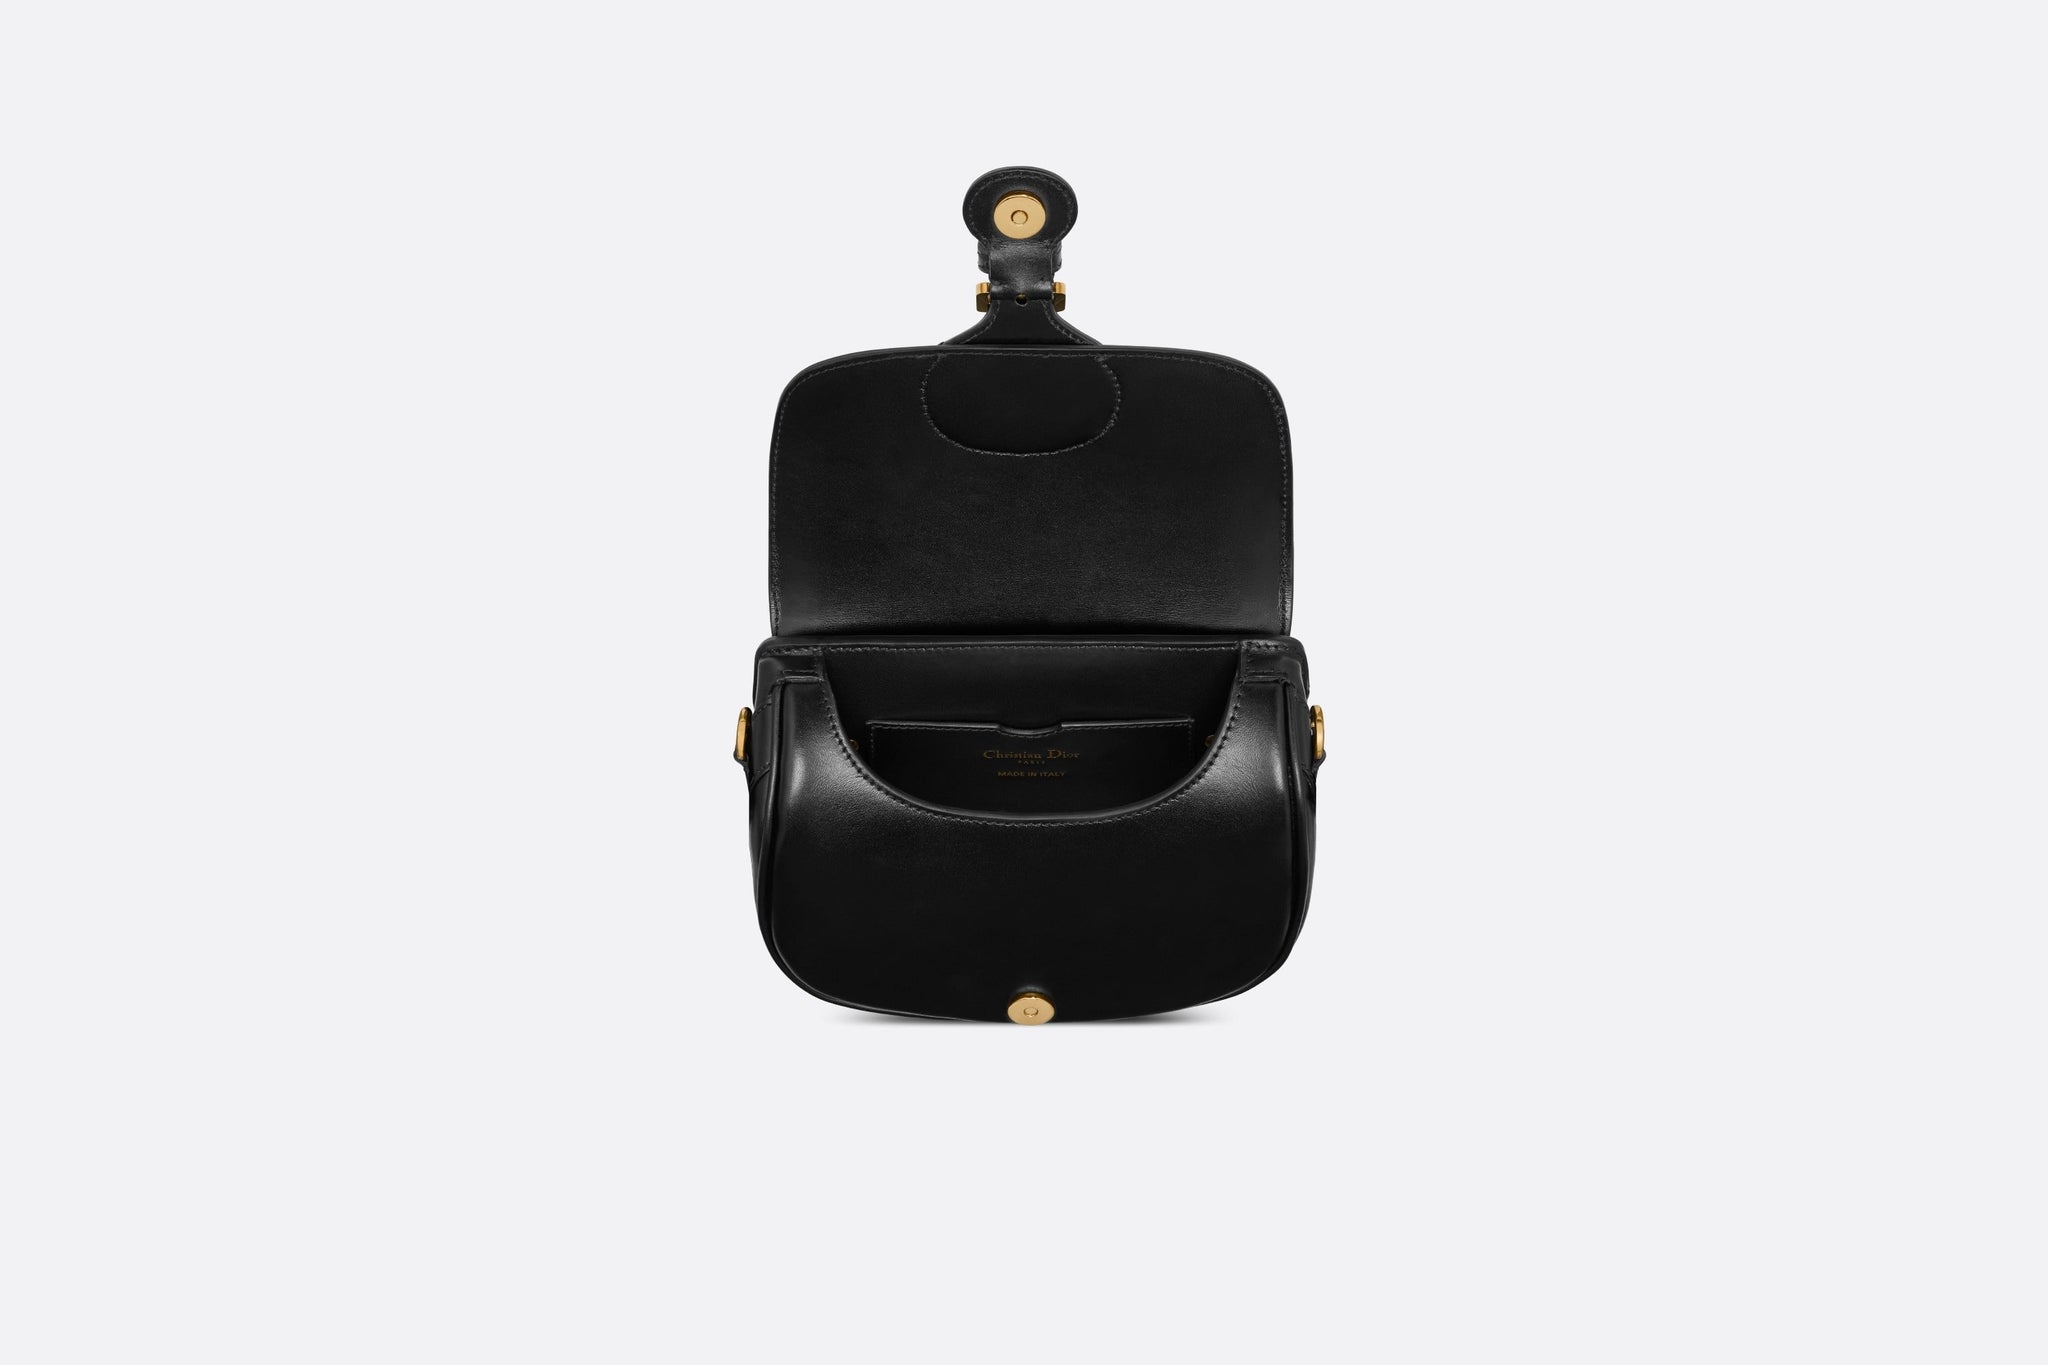 Dior Bobby Bag - The New Kid on the Block —